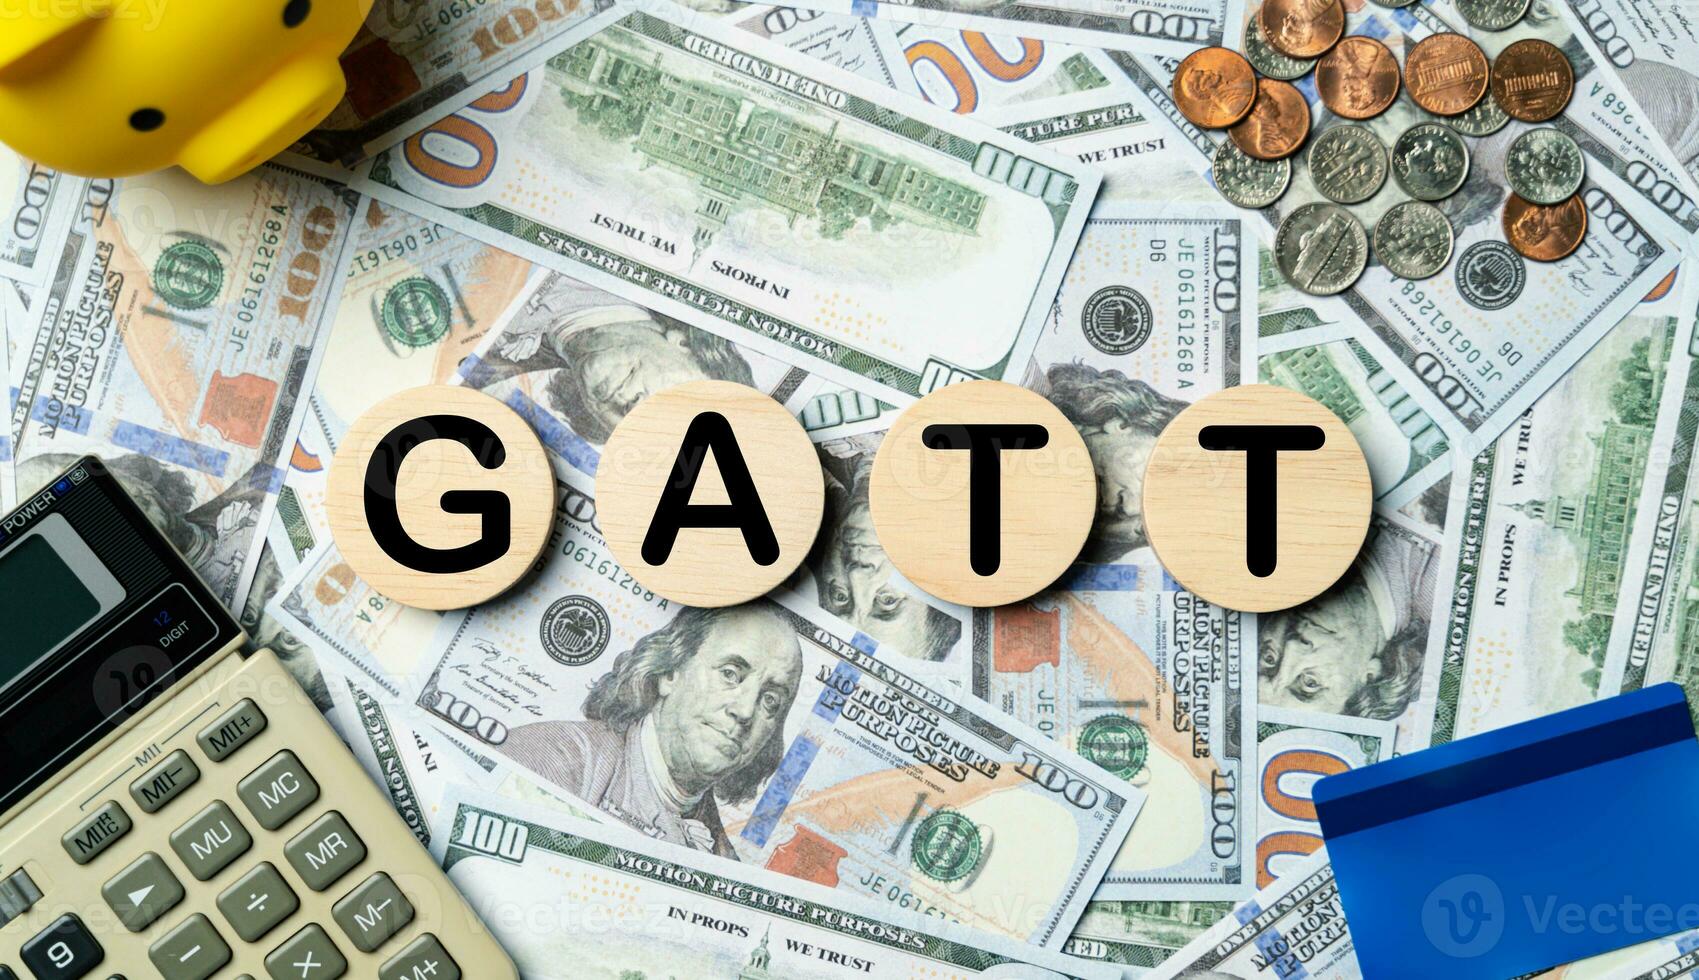 GATT text in wooden circle on Banknotes background, credit card, piggybank, calculator. General agreement on tariff and trade, Future, goals, opportunity, business strategy and financial concept. photo